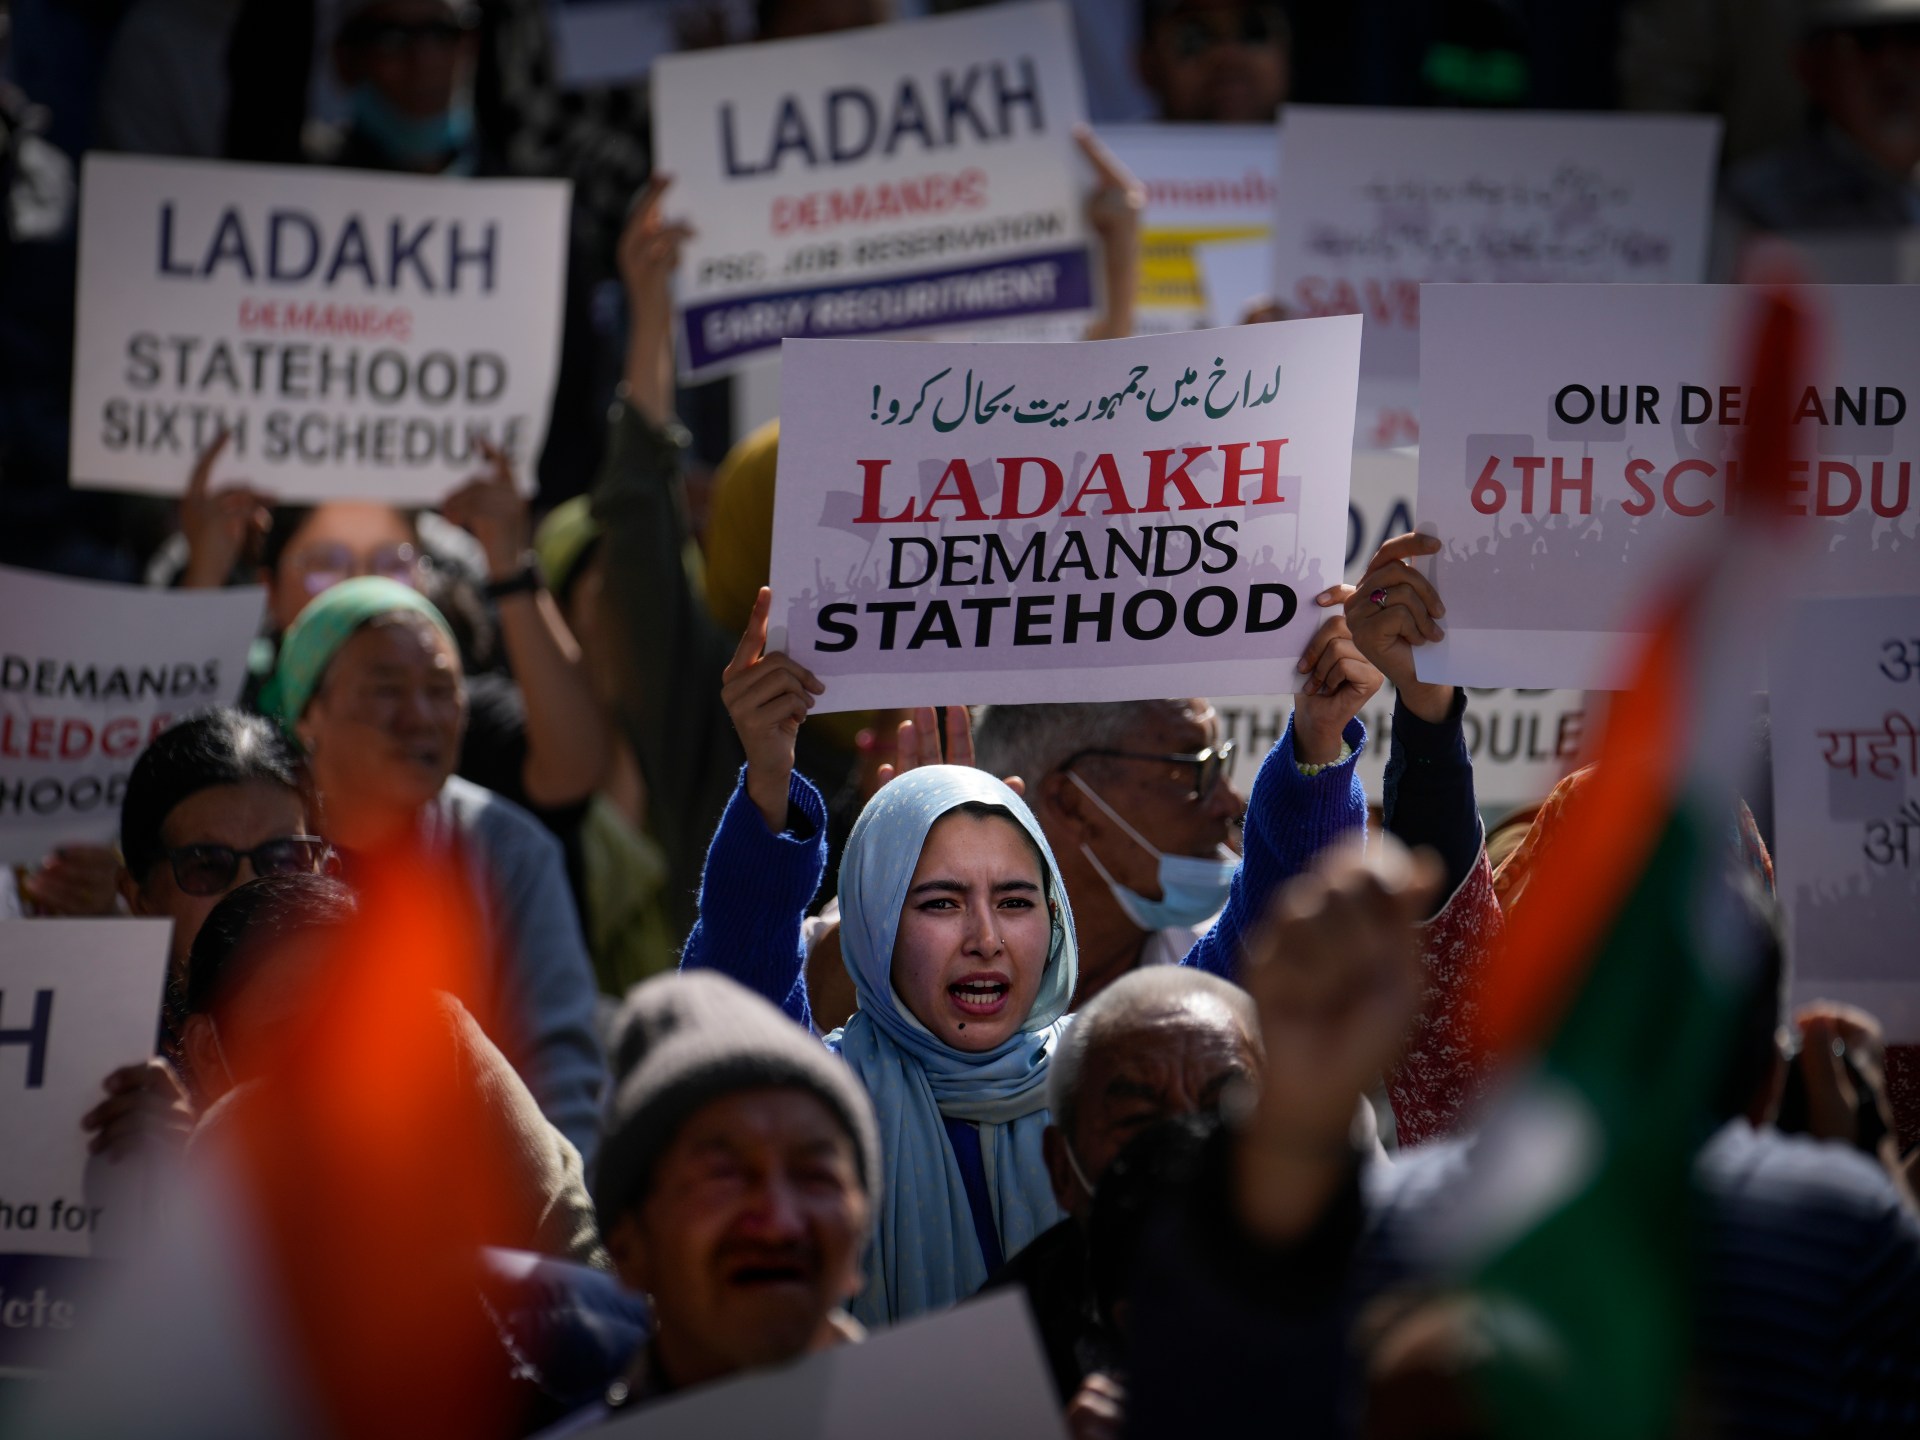 Why are people in India’s Ladakh protesting against central government? | News